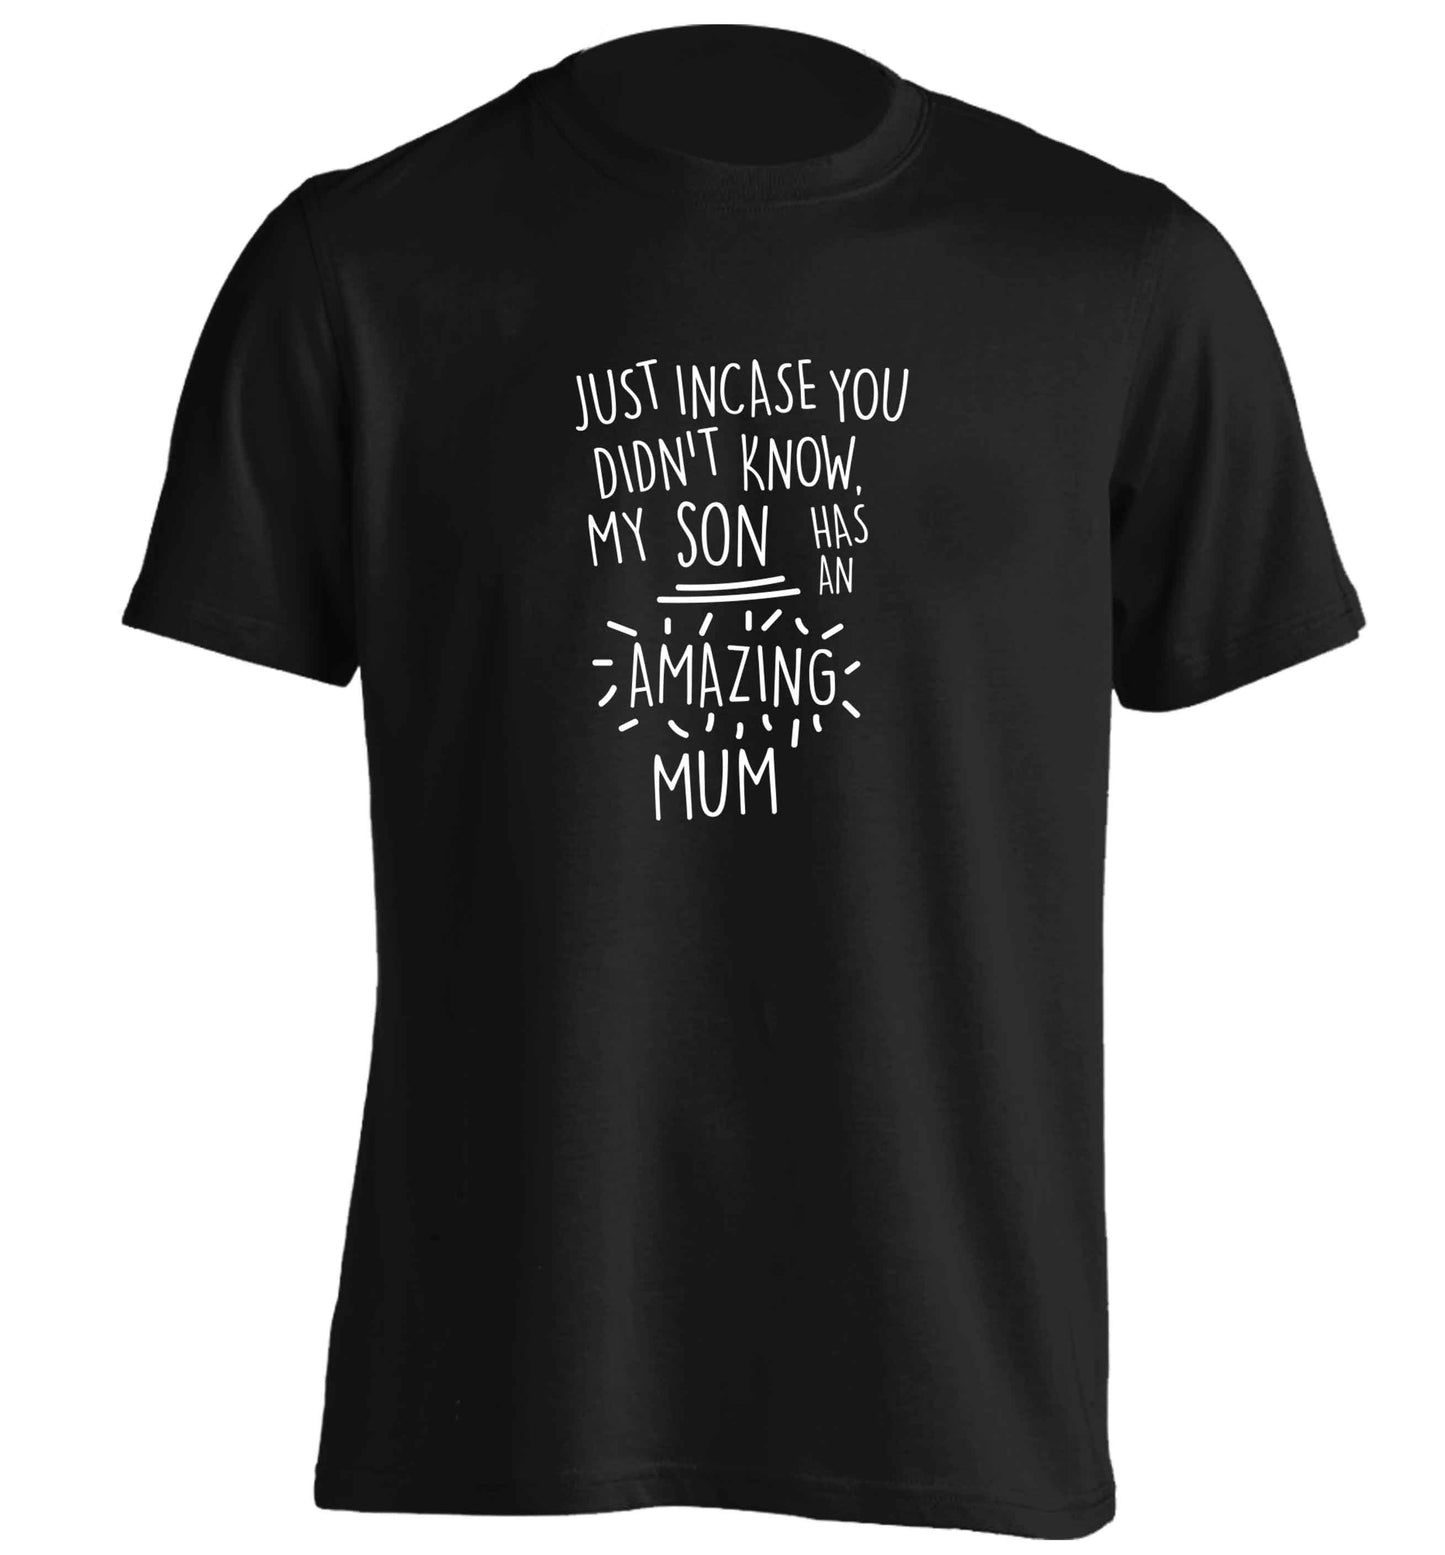 Just incase you didn't know my son has an amazing mum adults unisex black Tshirt 2XL